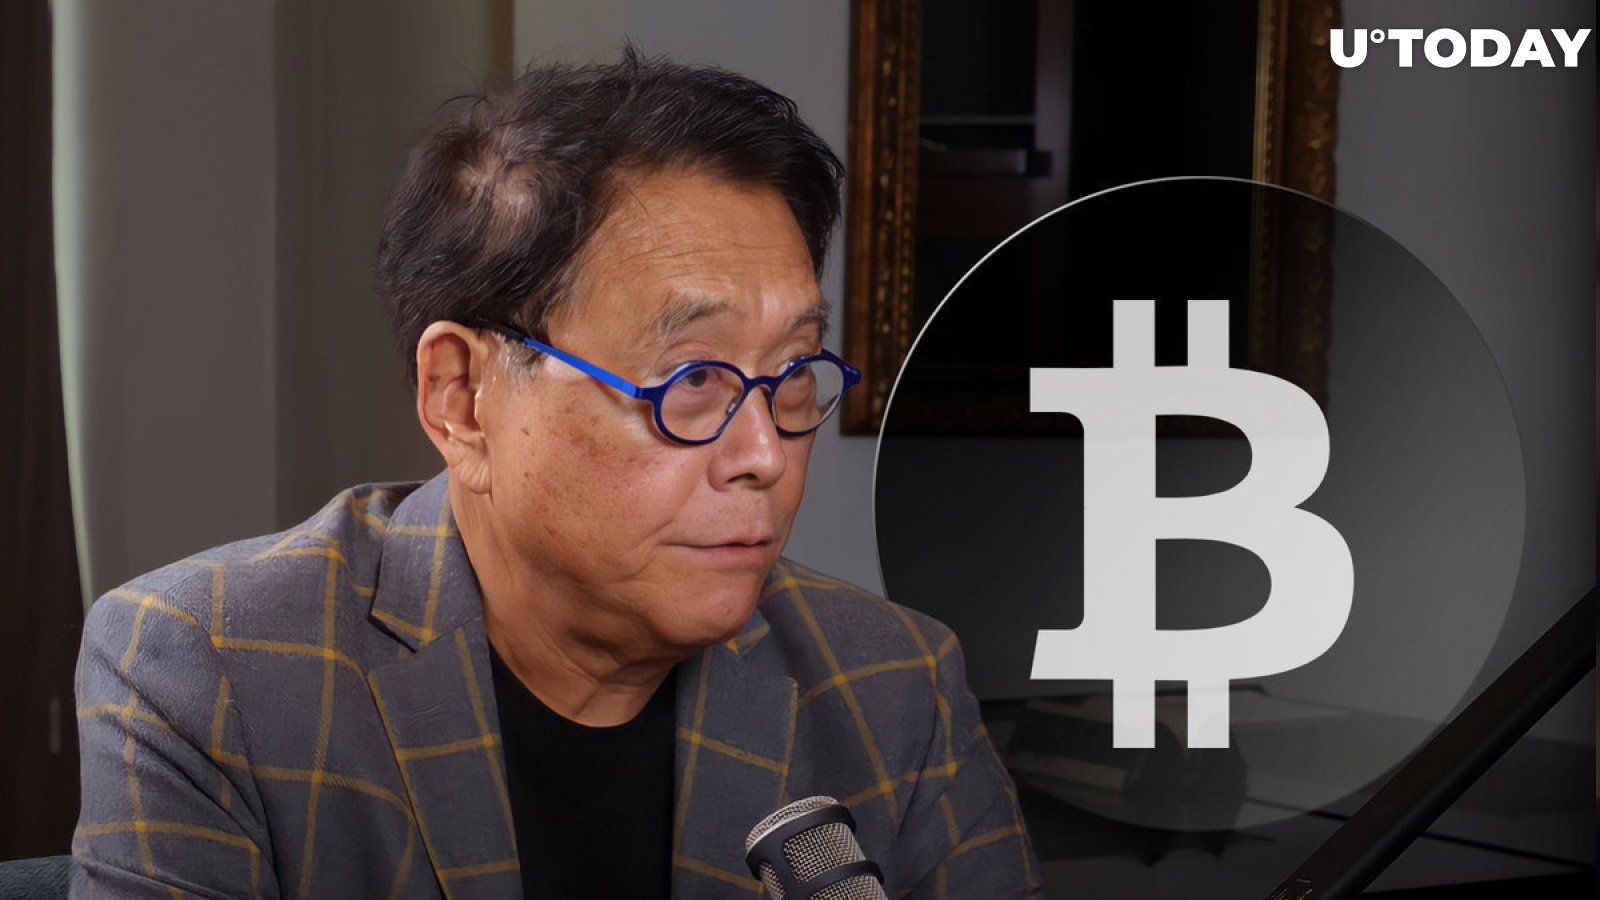  "rich dad poor dad" The author says that it is "Possible" That Bitcoin is a scam